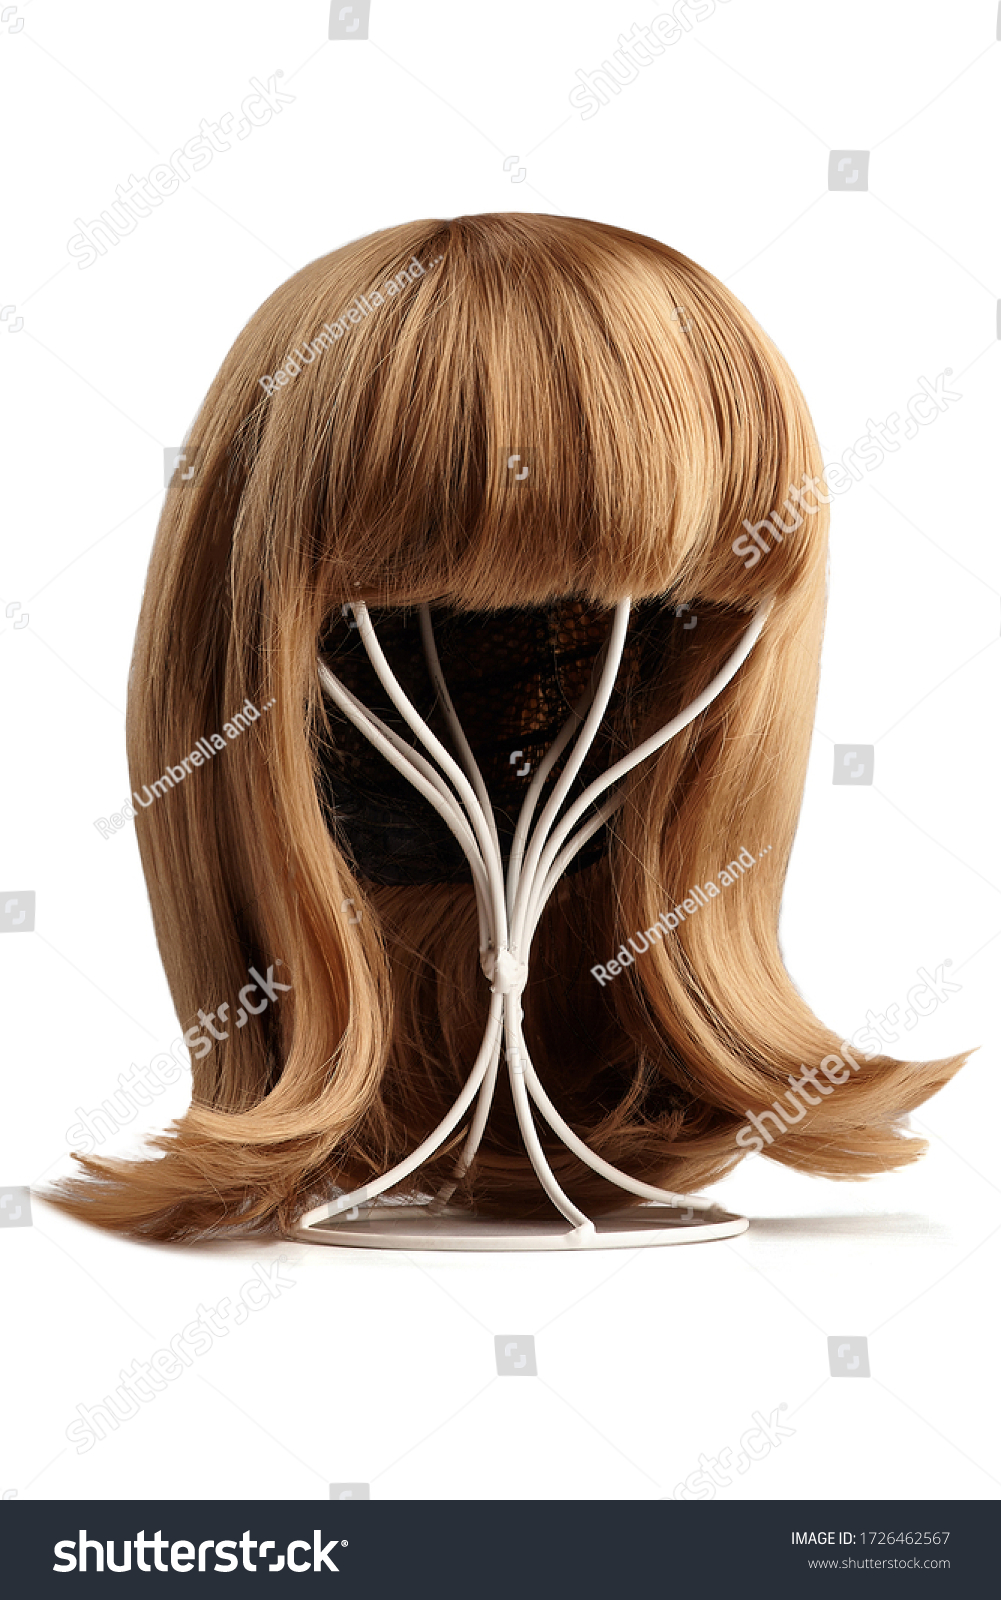 Subject shot of a natural looking blonde wig with bangs and twisted strands fixed on the white metal wig holder. The stand with the wig is isolated on a white background.   #1726462567